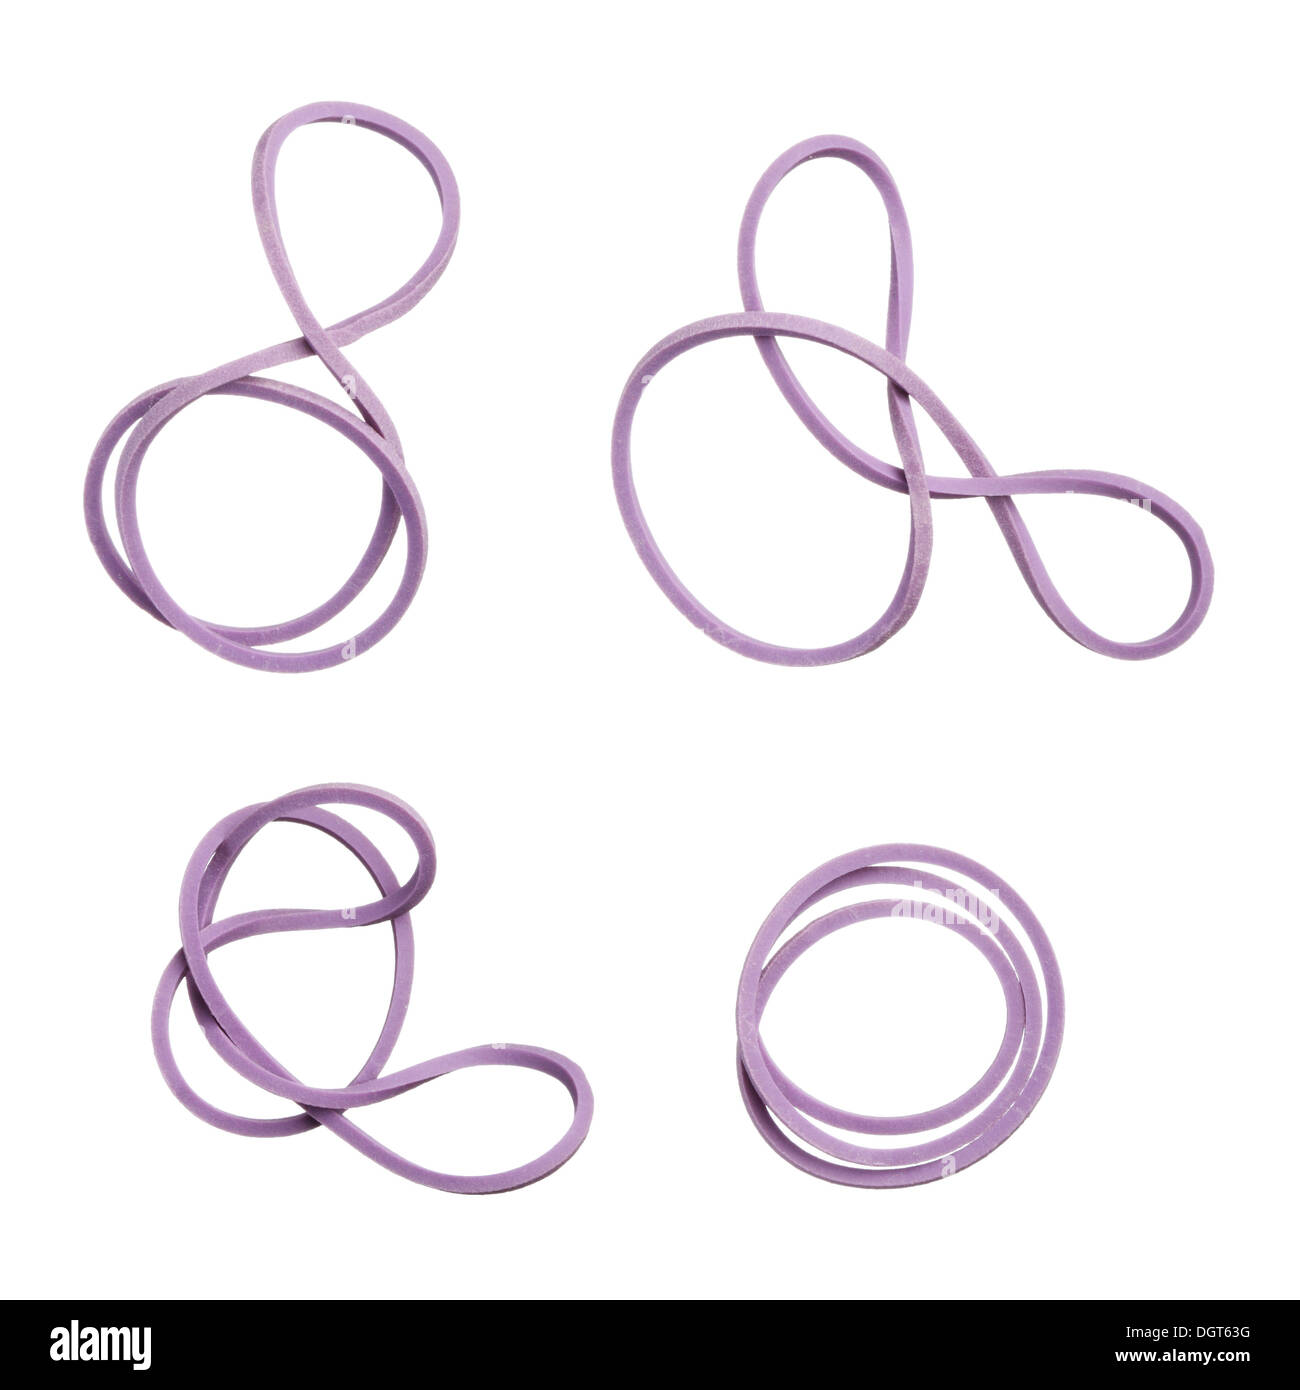 Twisted purple elastic rubber bands isolated on white background Stock Photo